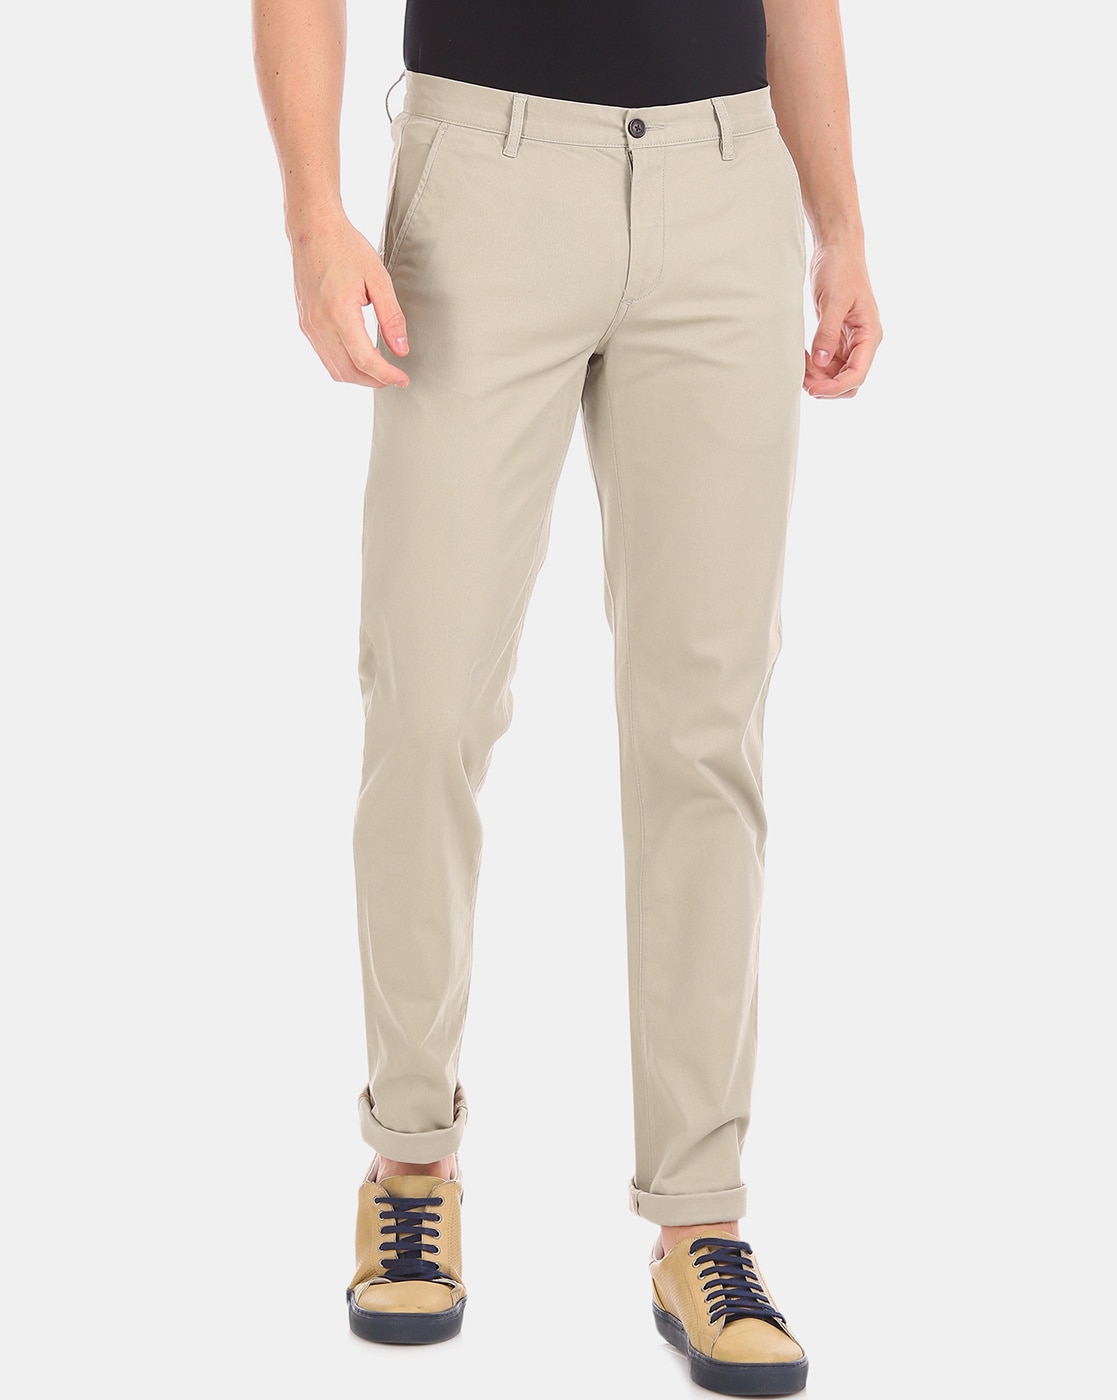 Arrow Sports Mens Casual Trousers in Tirupur at best price by Js Trading  Company  Justdial